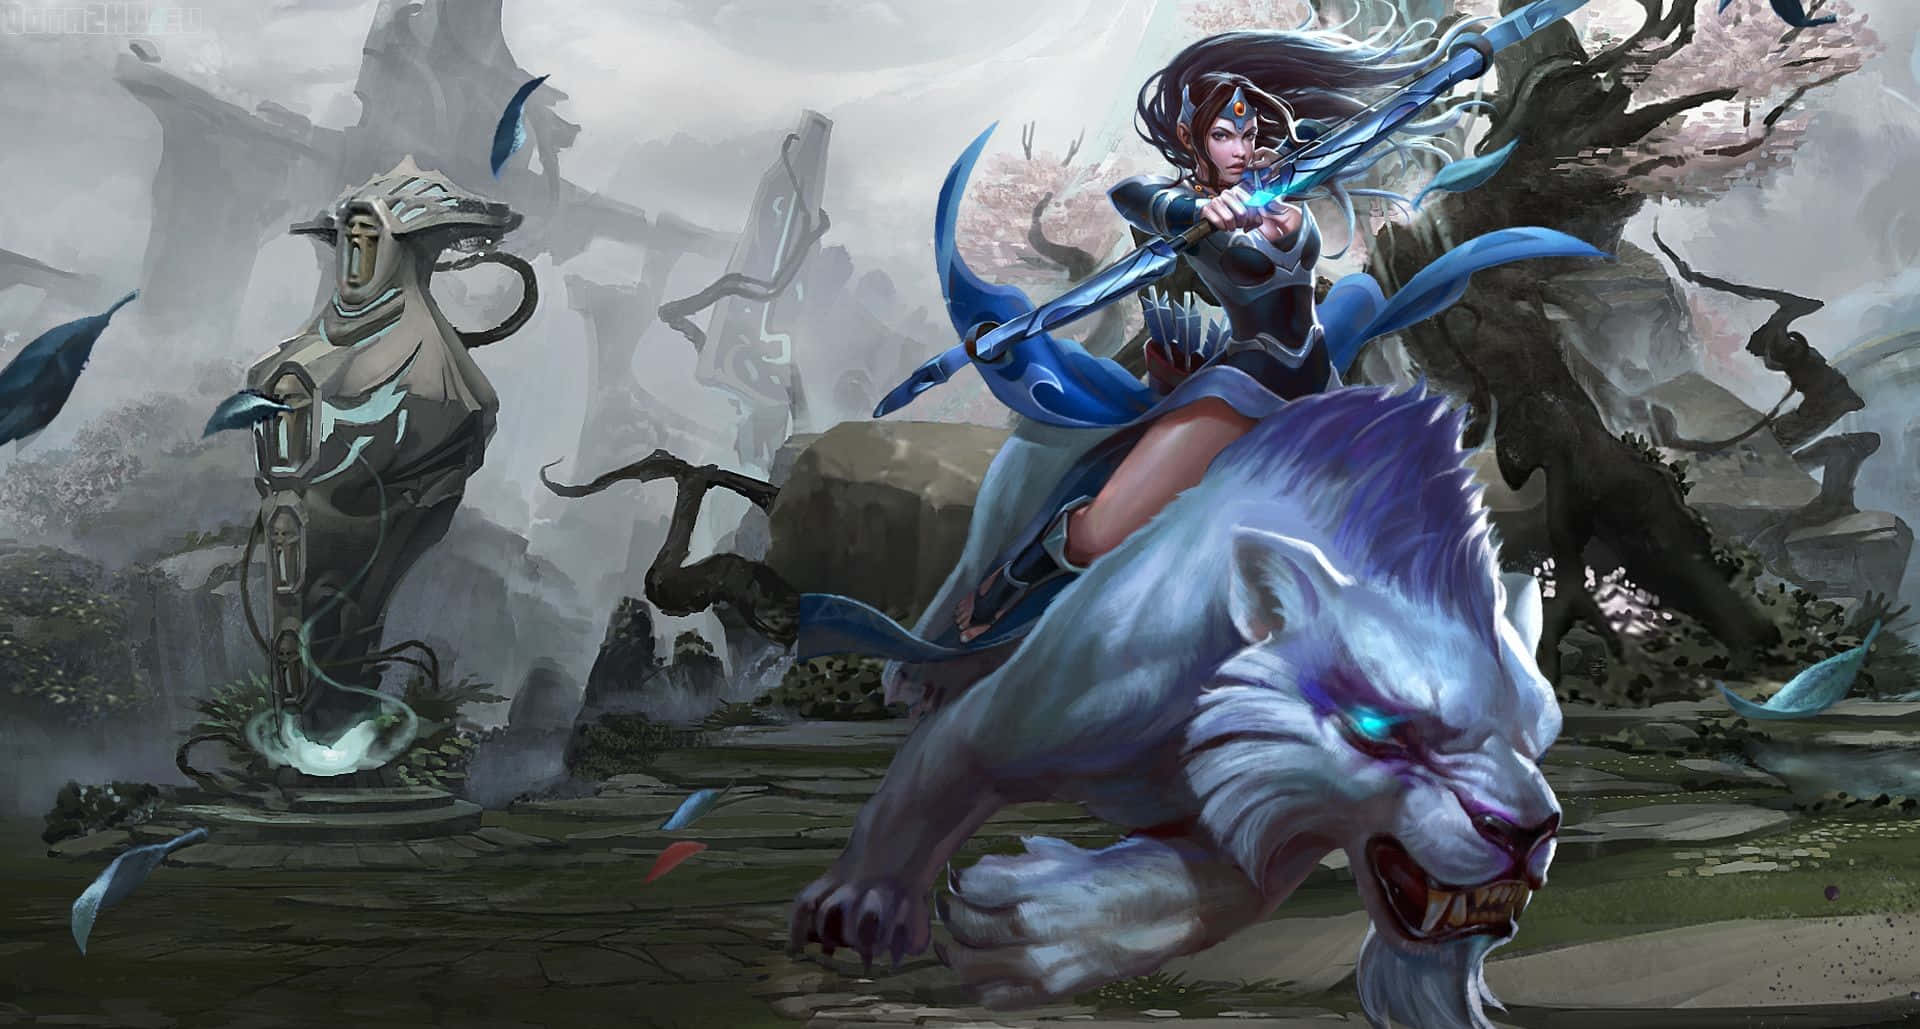 Mirana, the Priestess of the Moon, riding her mighty tiger in the mystical forests of Dota 2. Wallpaper